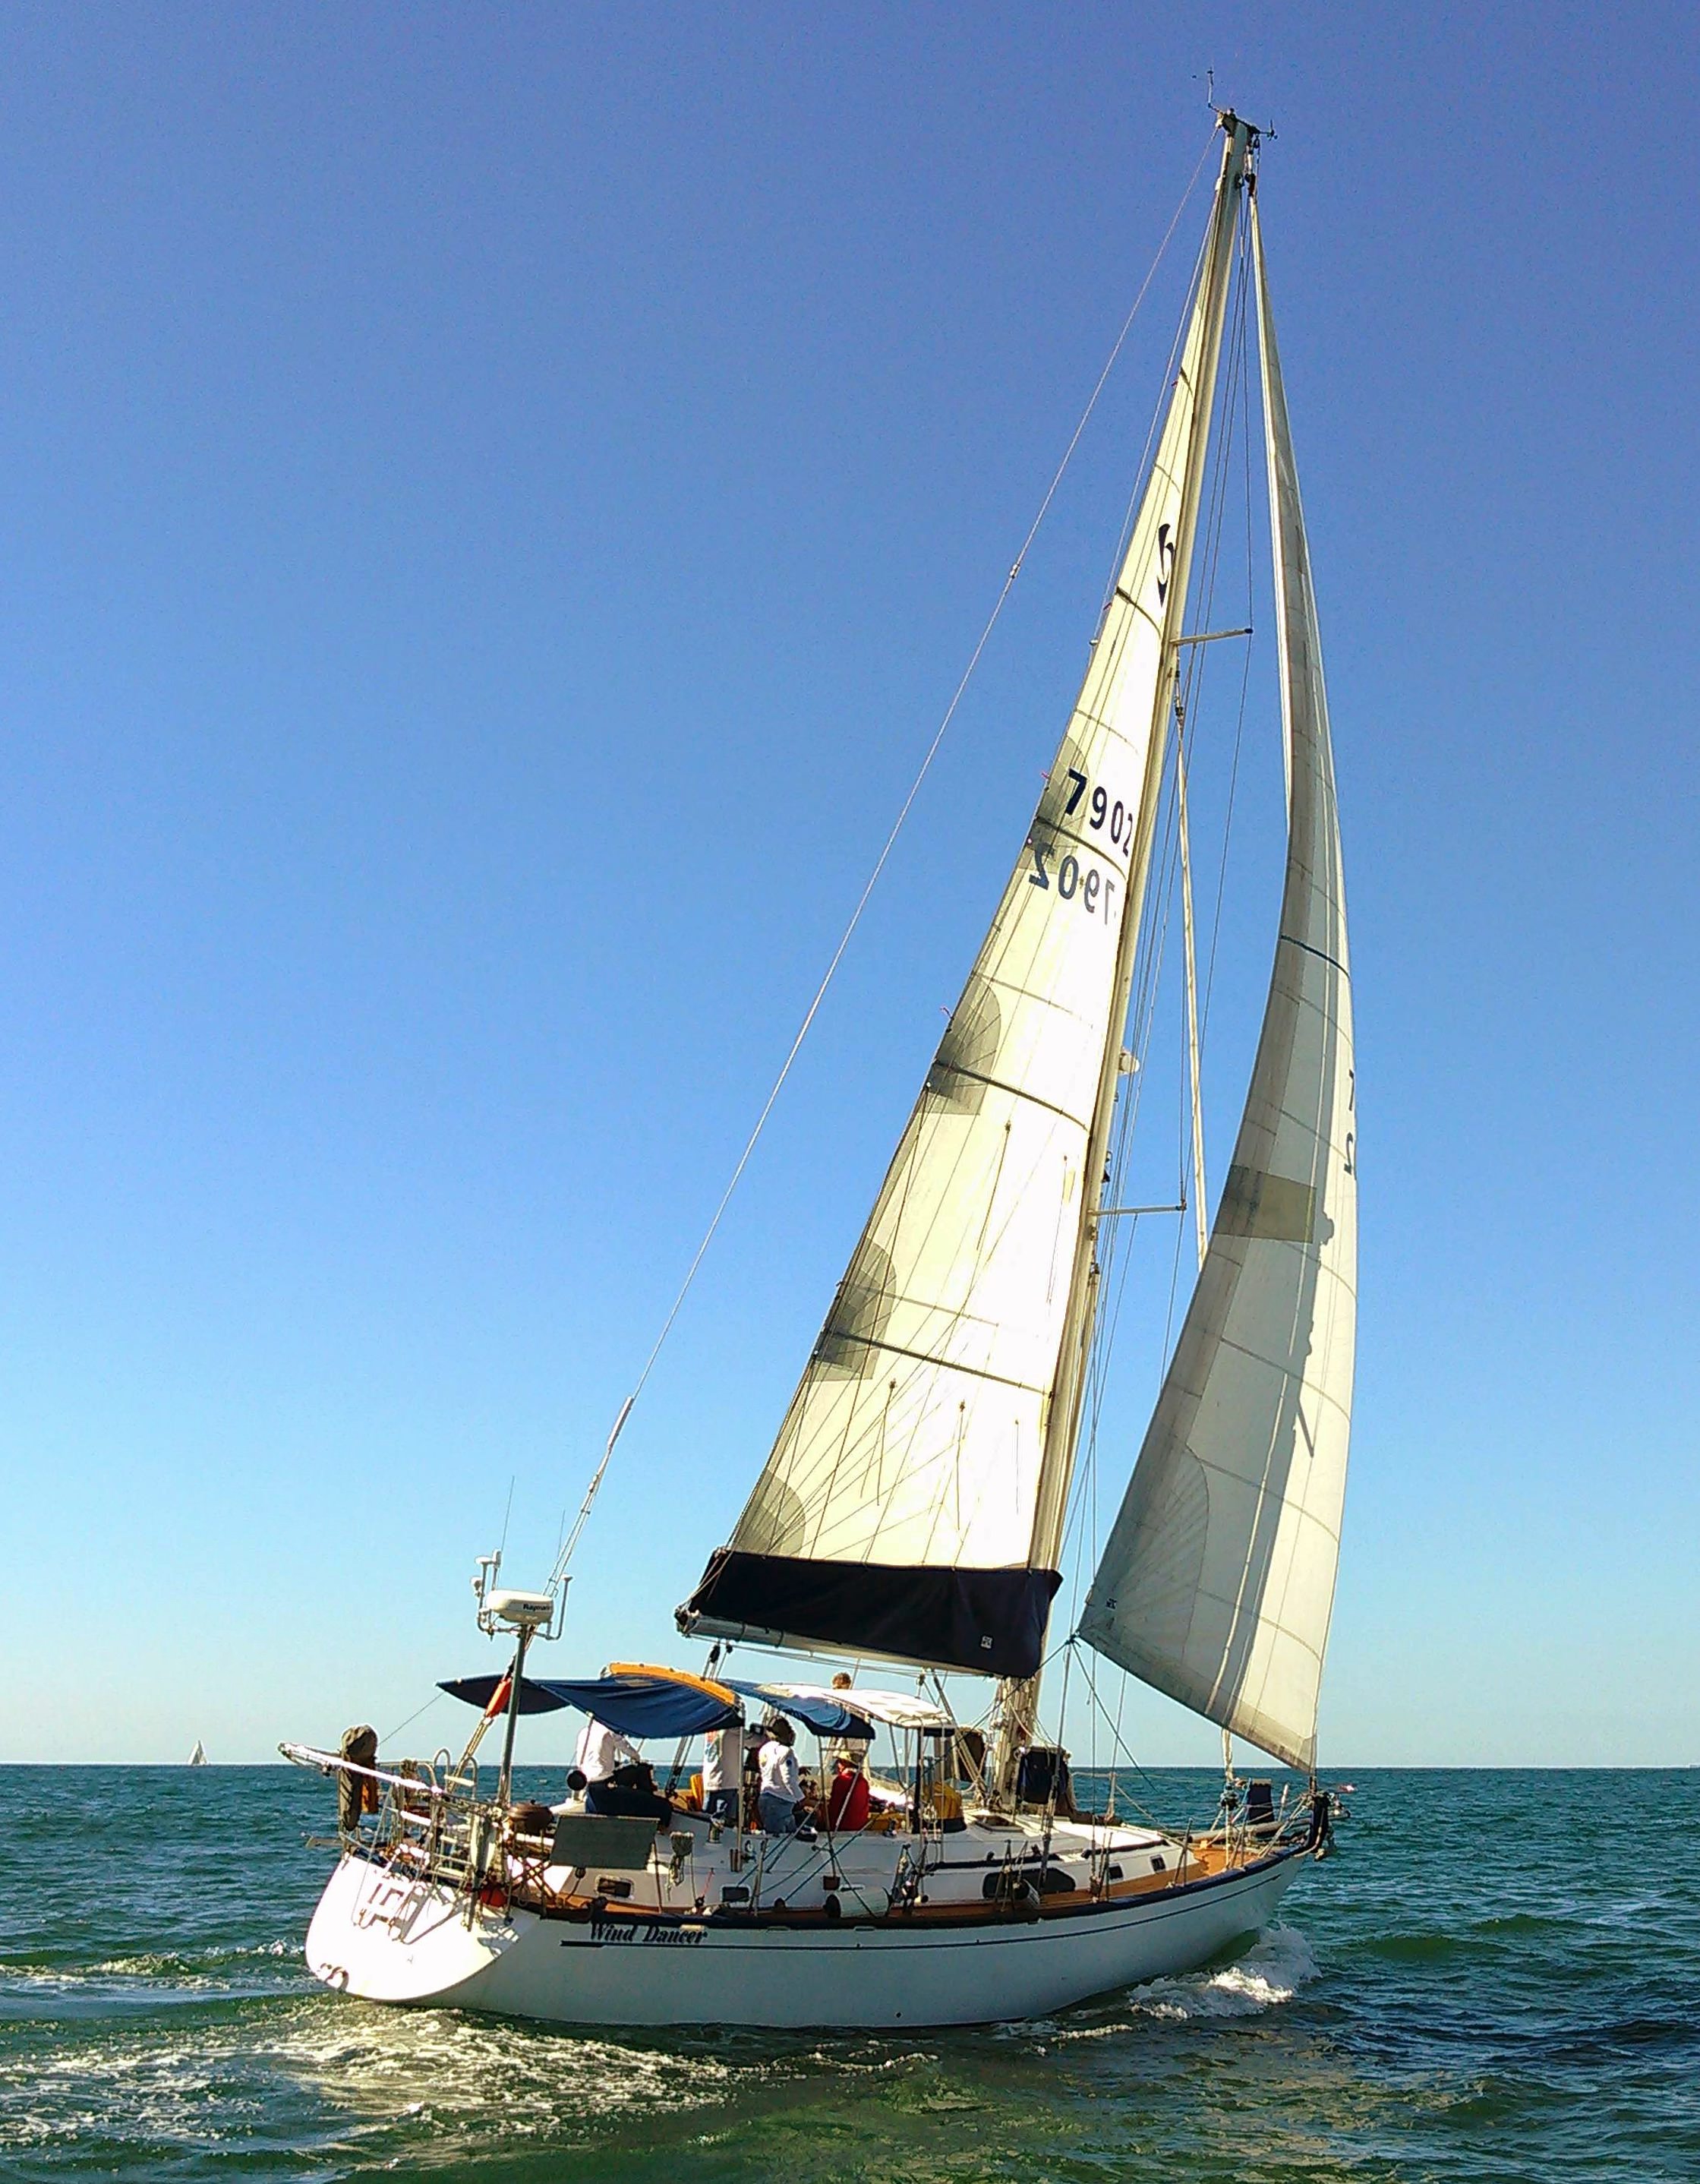 The Tayana 47 Wind Dancer sailed to Hawaii and back with her UK Sailmakers HydraNet Radial main and dacron genoa and staysail. Oliver recommended HyrdaNet for the main since it is the sail that is up 100% of the time the boat is sailing.